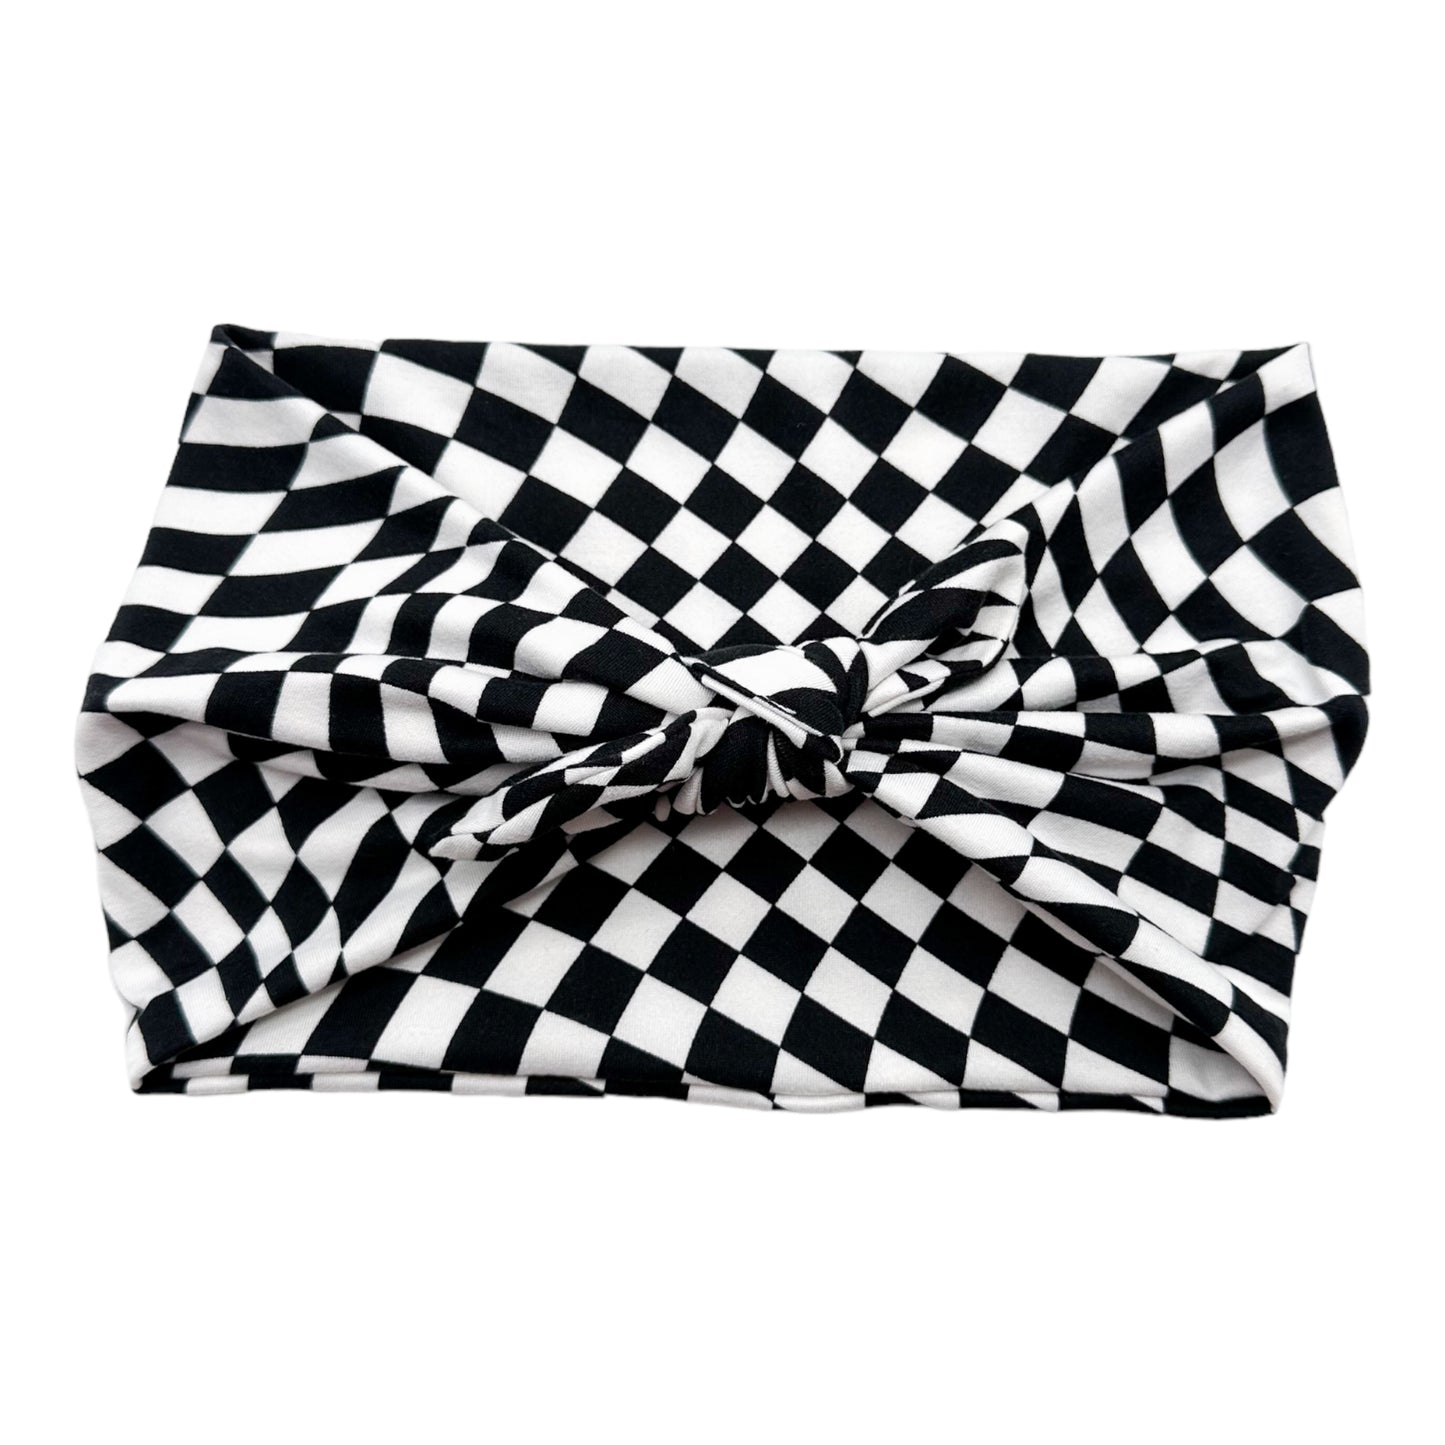 GROOVY B&W CHECKERS - LUXE